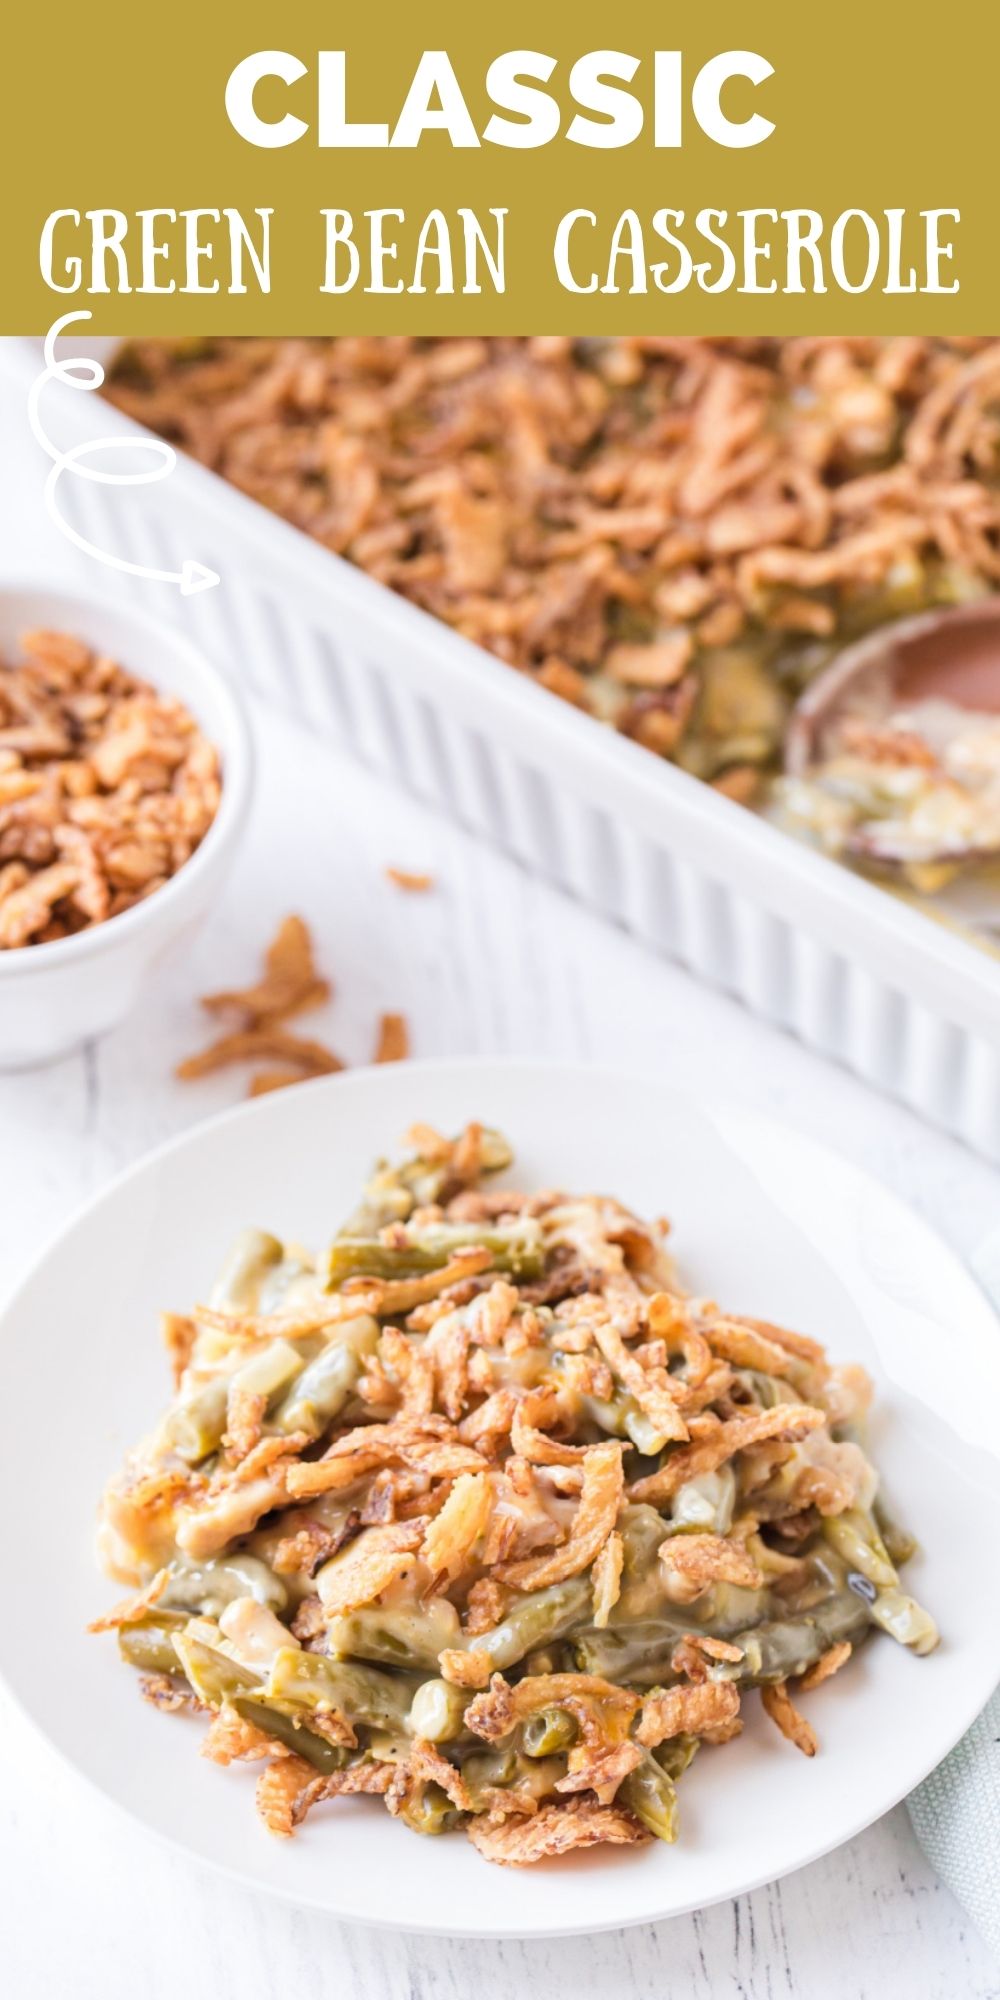 This old-fashioned Classic Green Bean Casserole is a holiday dish not to be left off your menu. A simple, but favorite holiday recipe. via @familyfresh